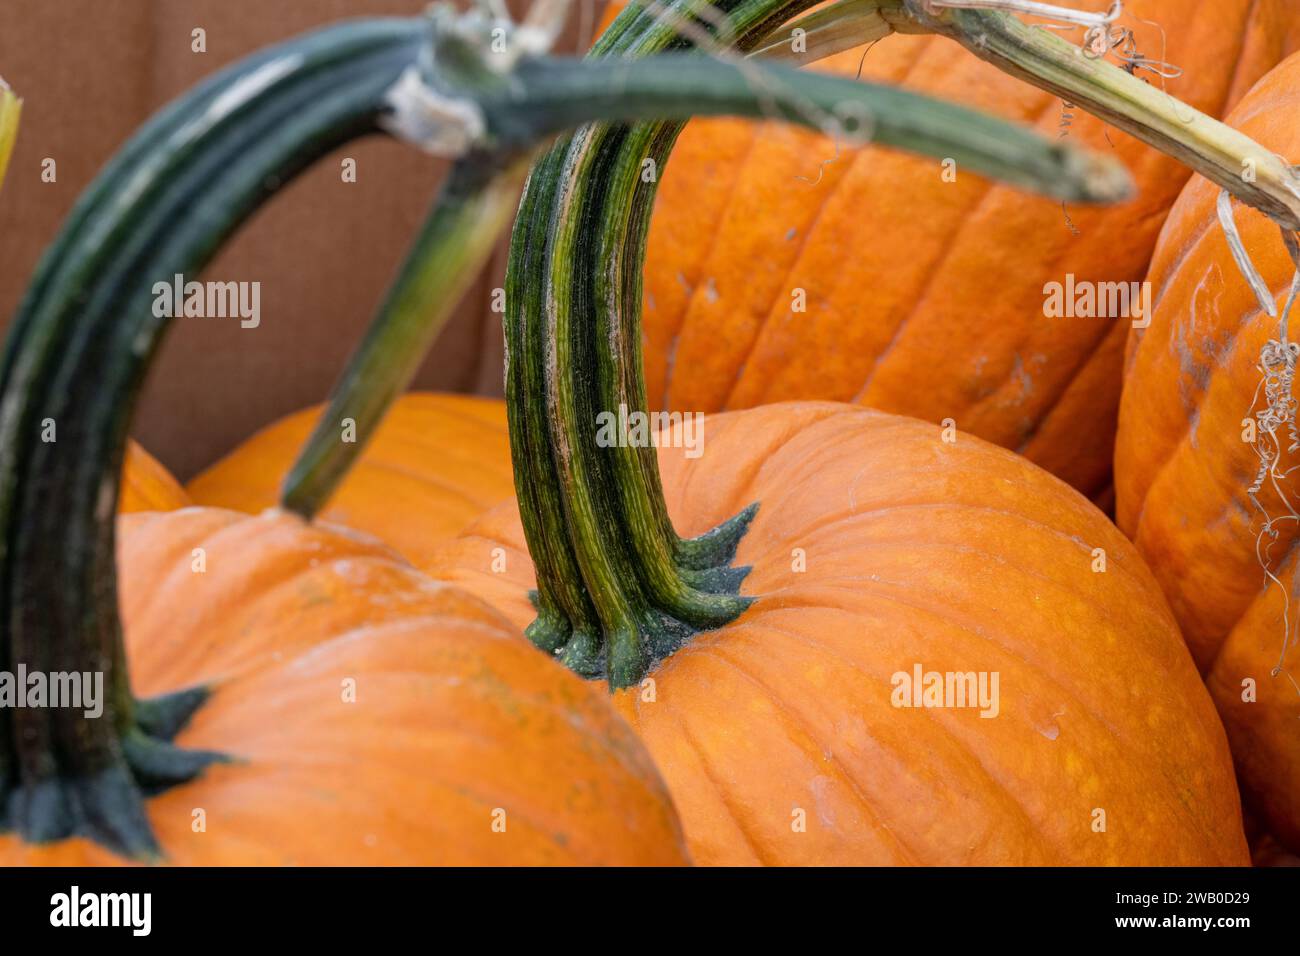 A closeup of multiple large round vibrant orange colored Halloween pumpkins. The dried vine stalks have a leathery texture of green stripes. Stock Photo